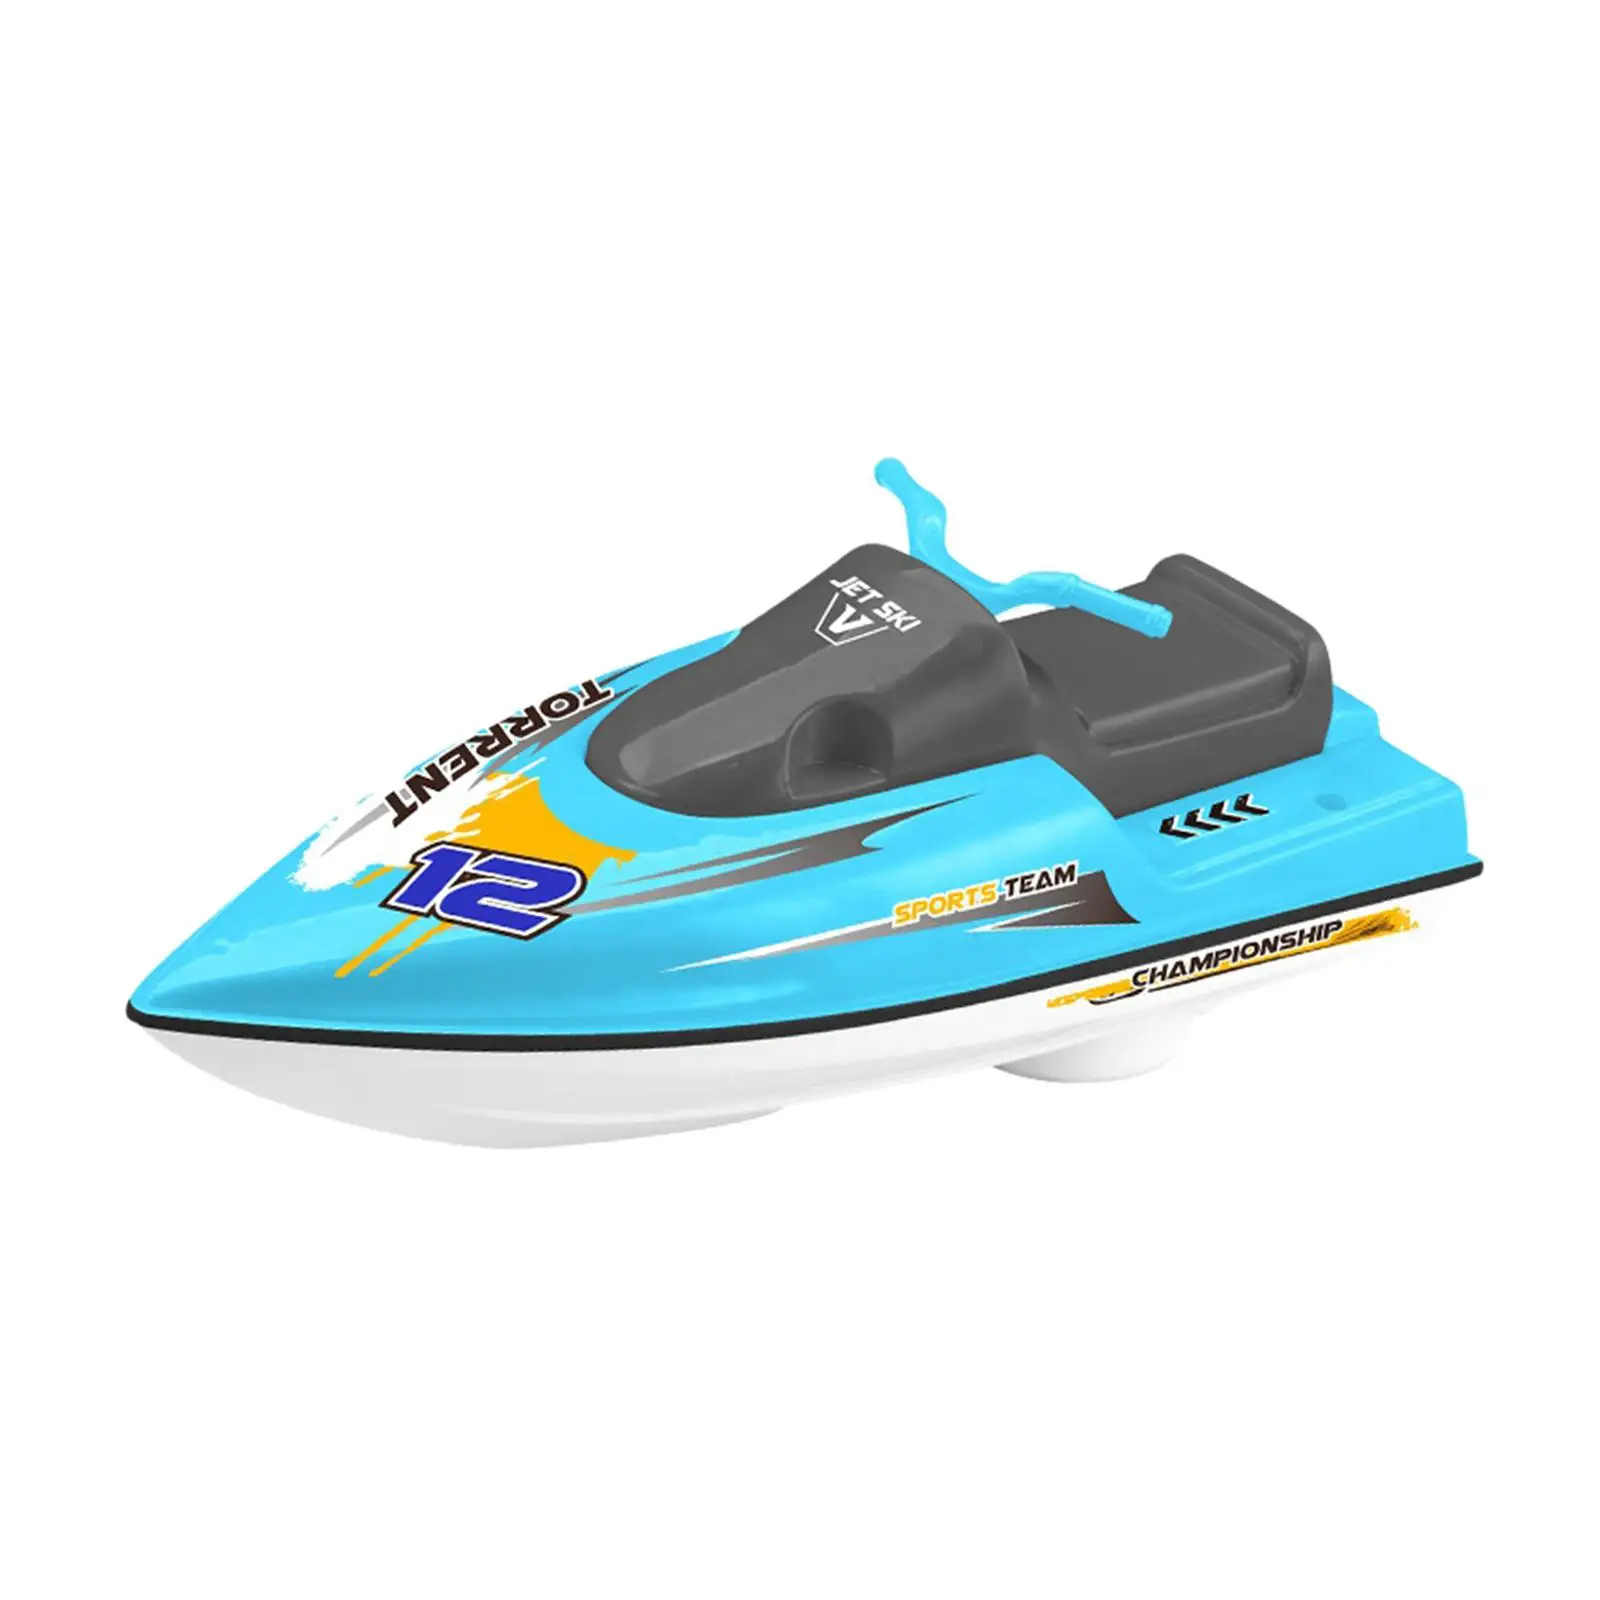 Baby Bath Toy Floating Toys Outdoor Water Toy Boat Tub Toy Electric Speed Boat Toy for Toddlers Baby Children Boys Girls Infant